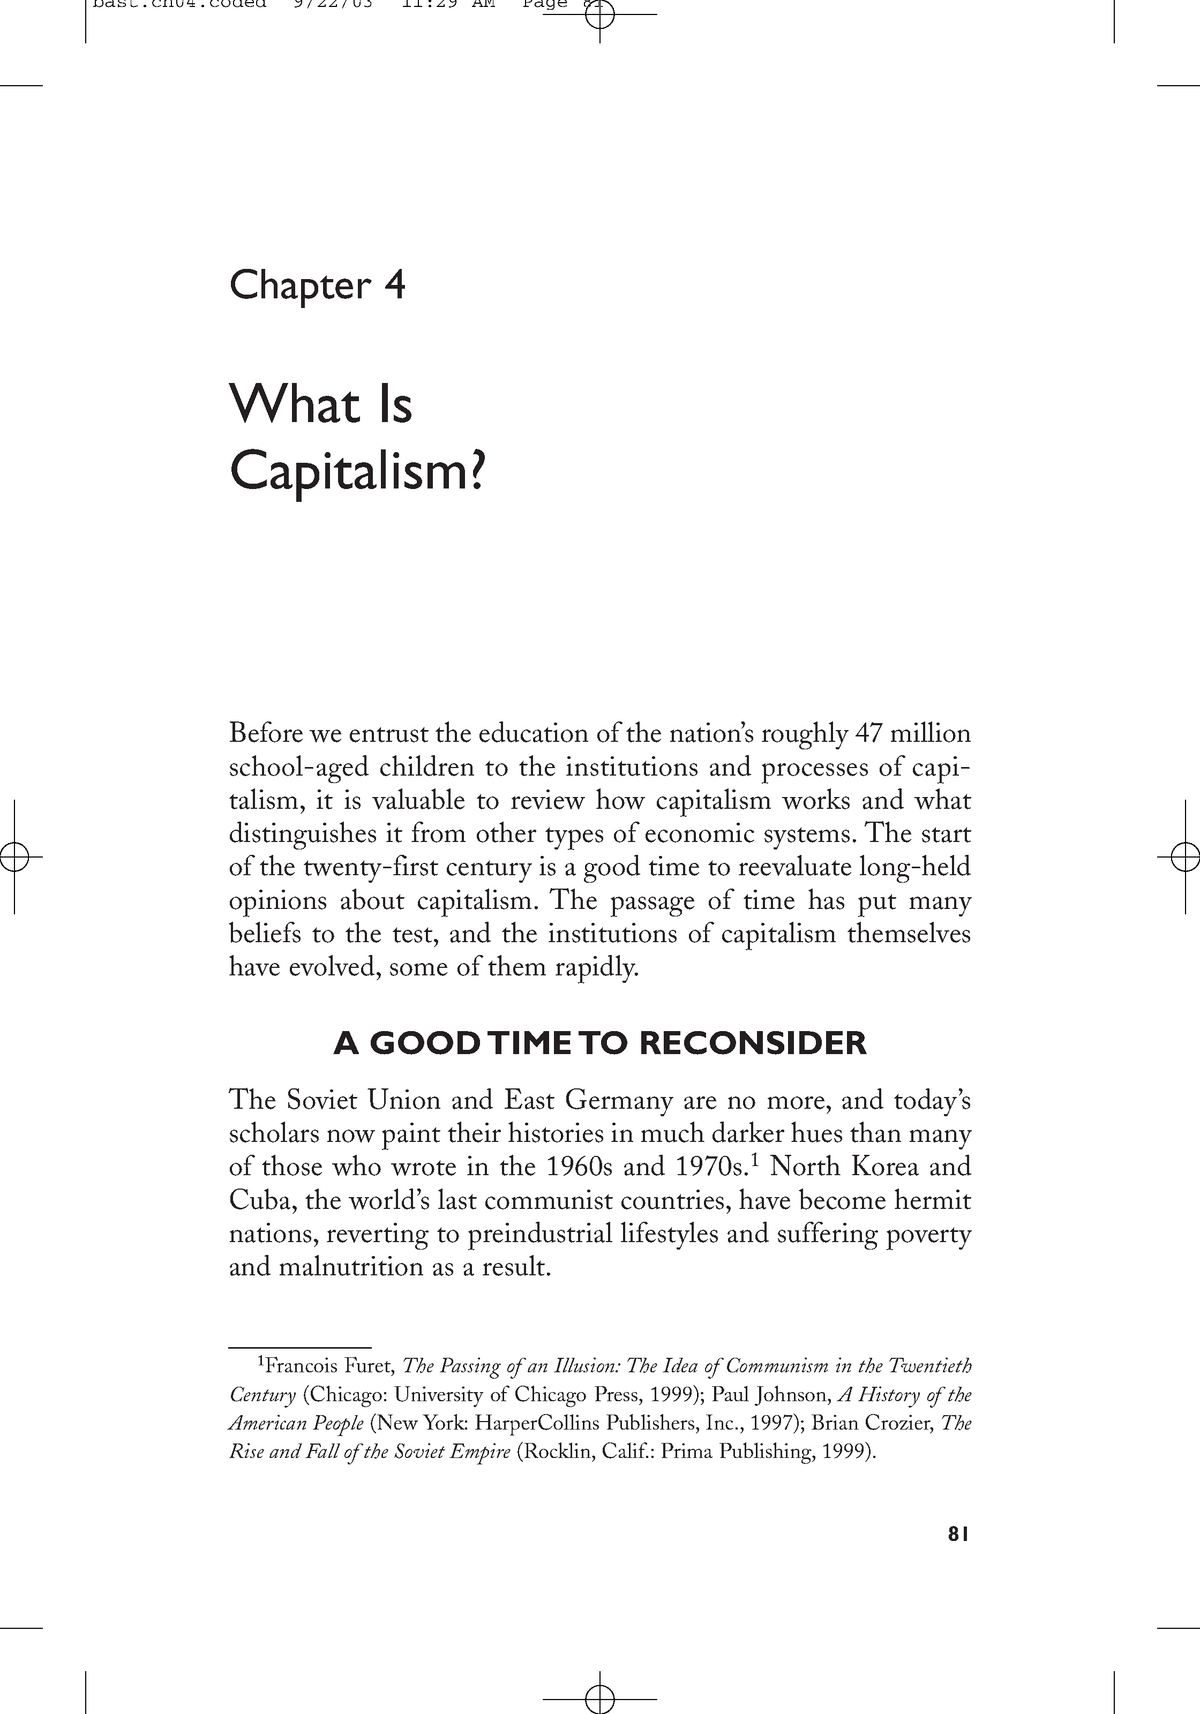 thesis statement examples capitalism